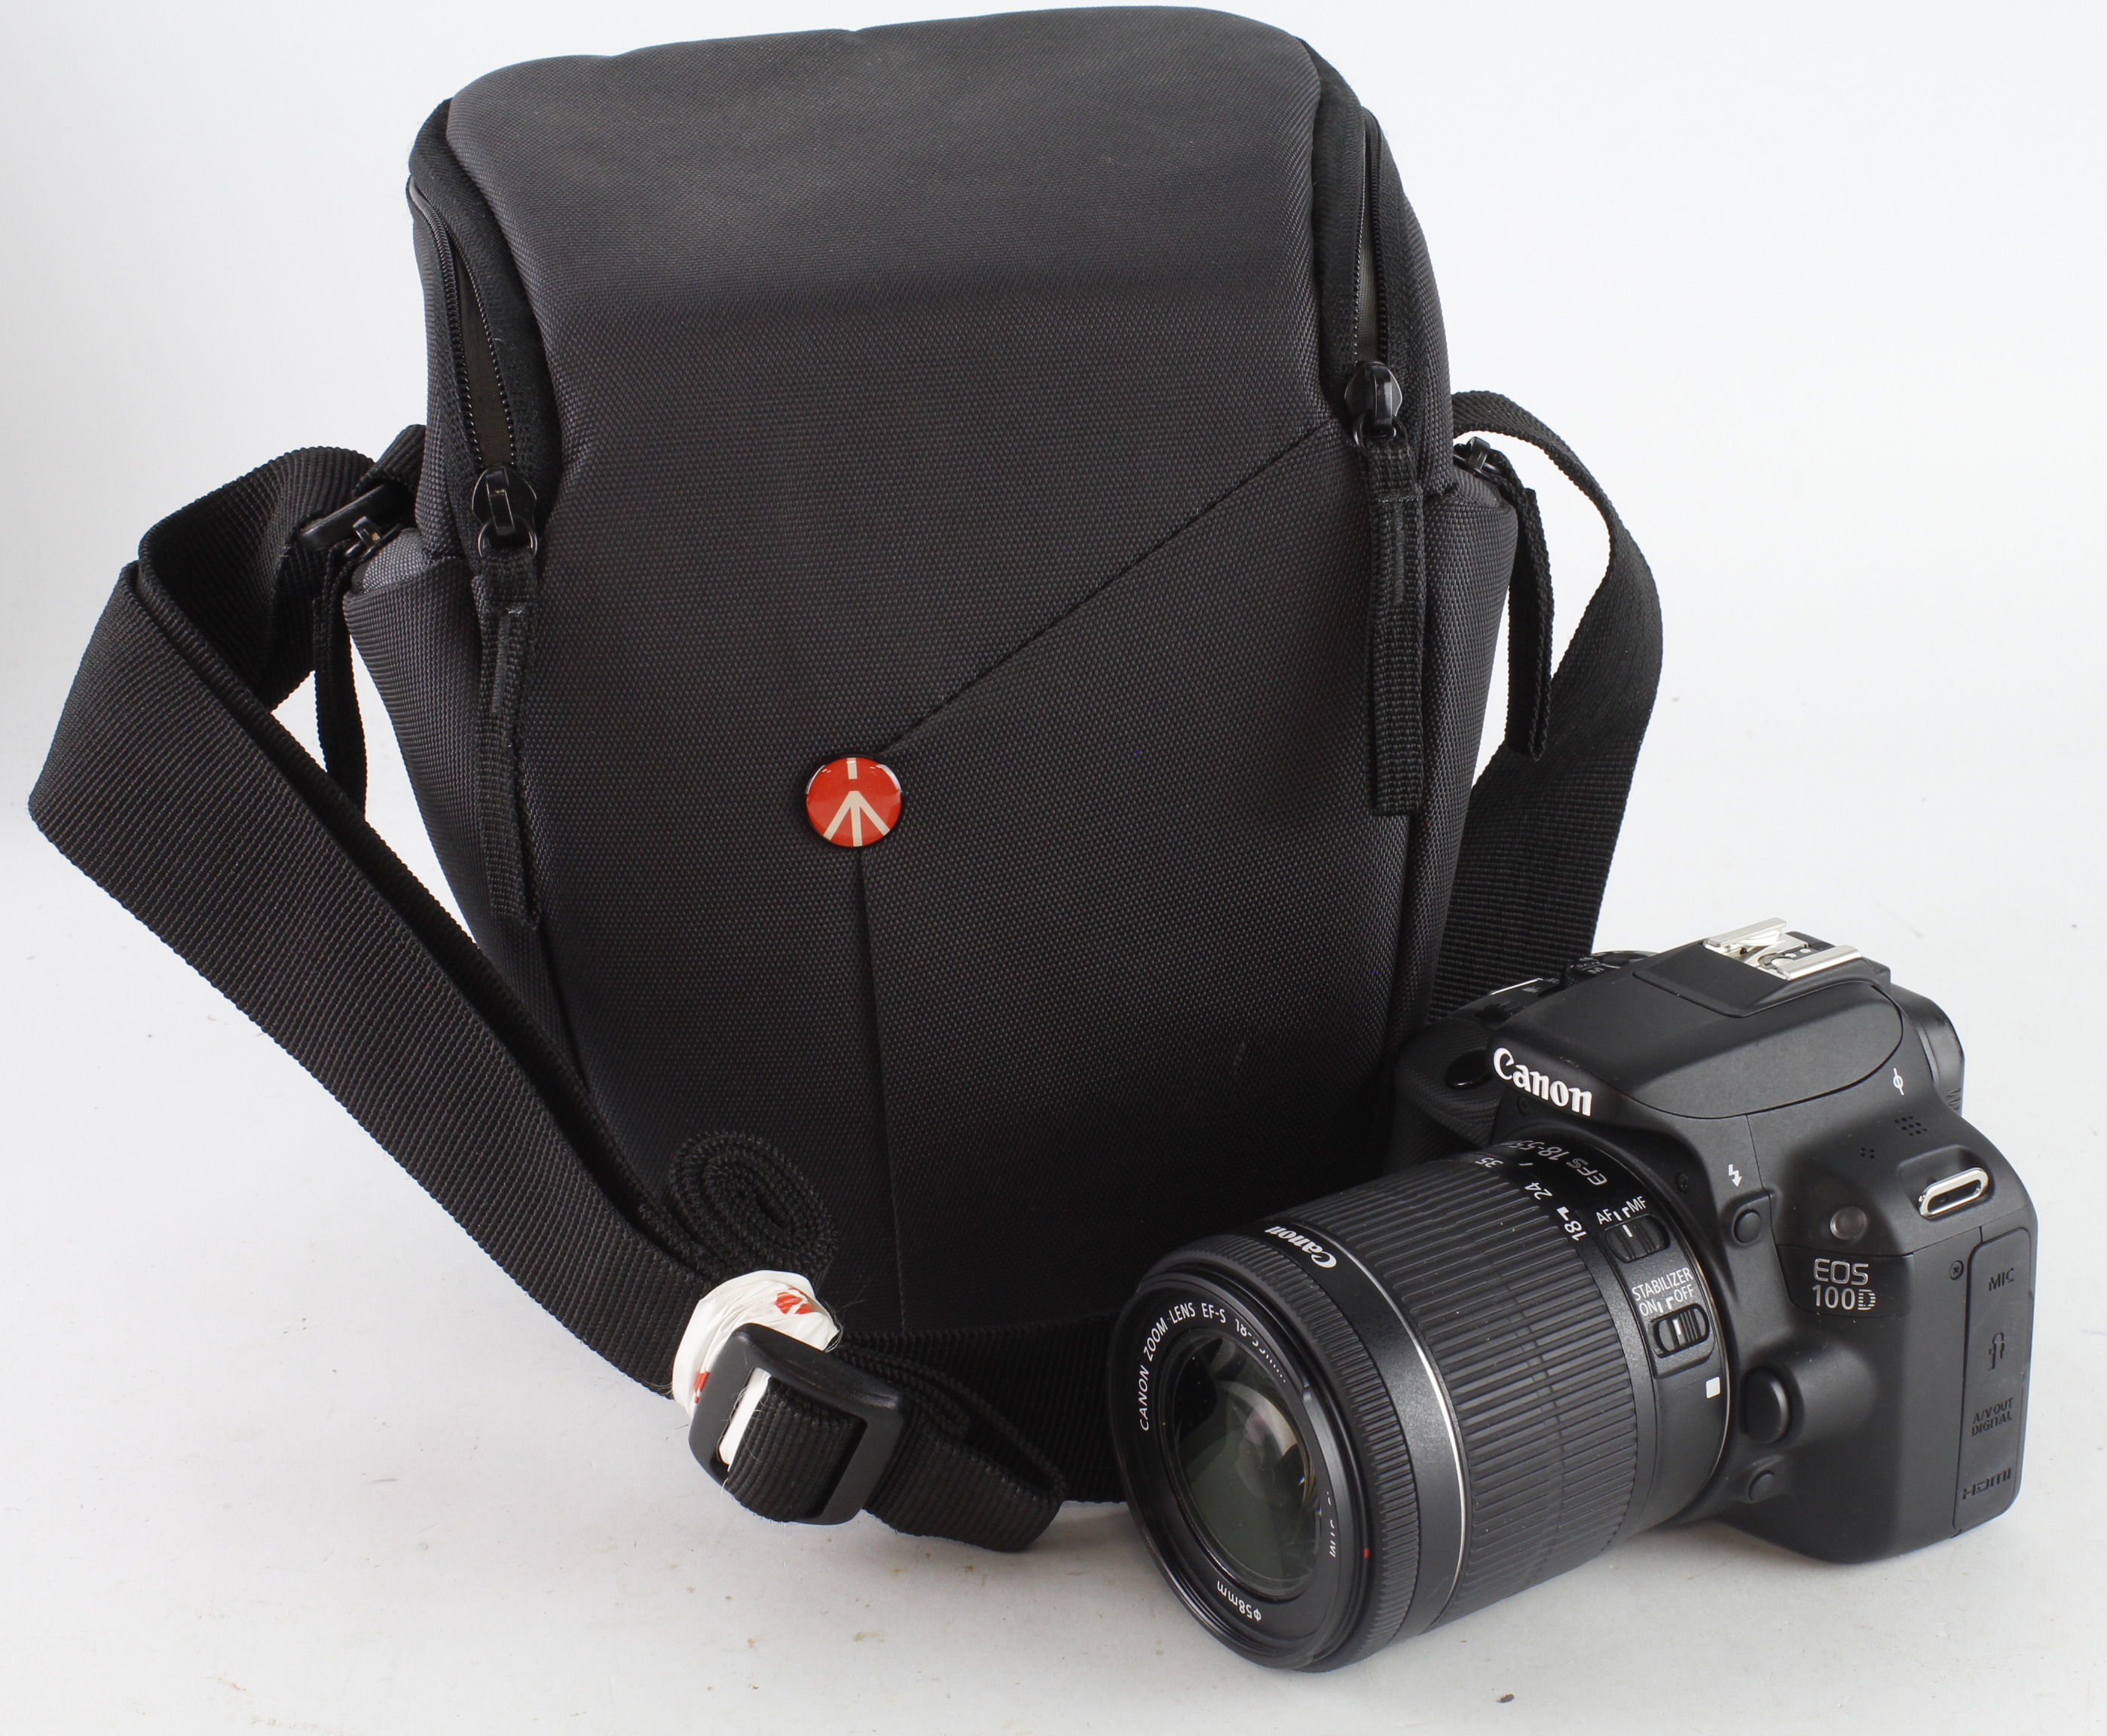 Canon EOS 100D camera, with Canon lens, with original manual etc., contained in Manfrotto case